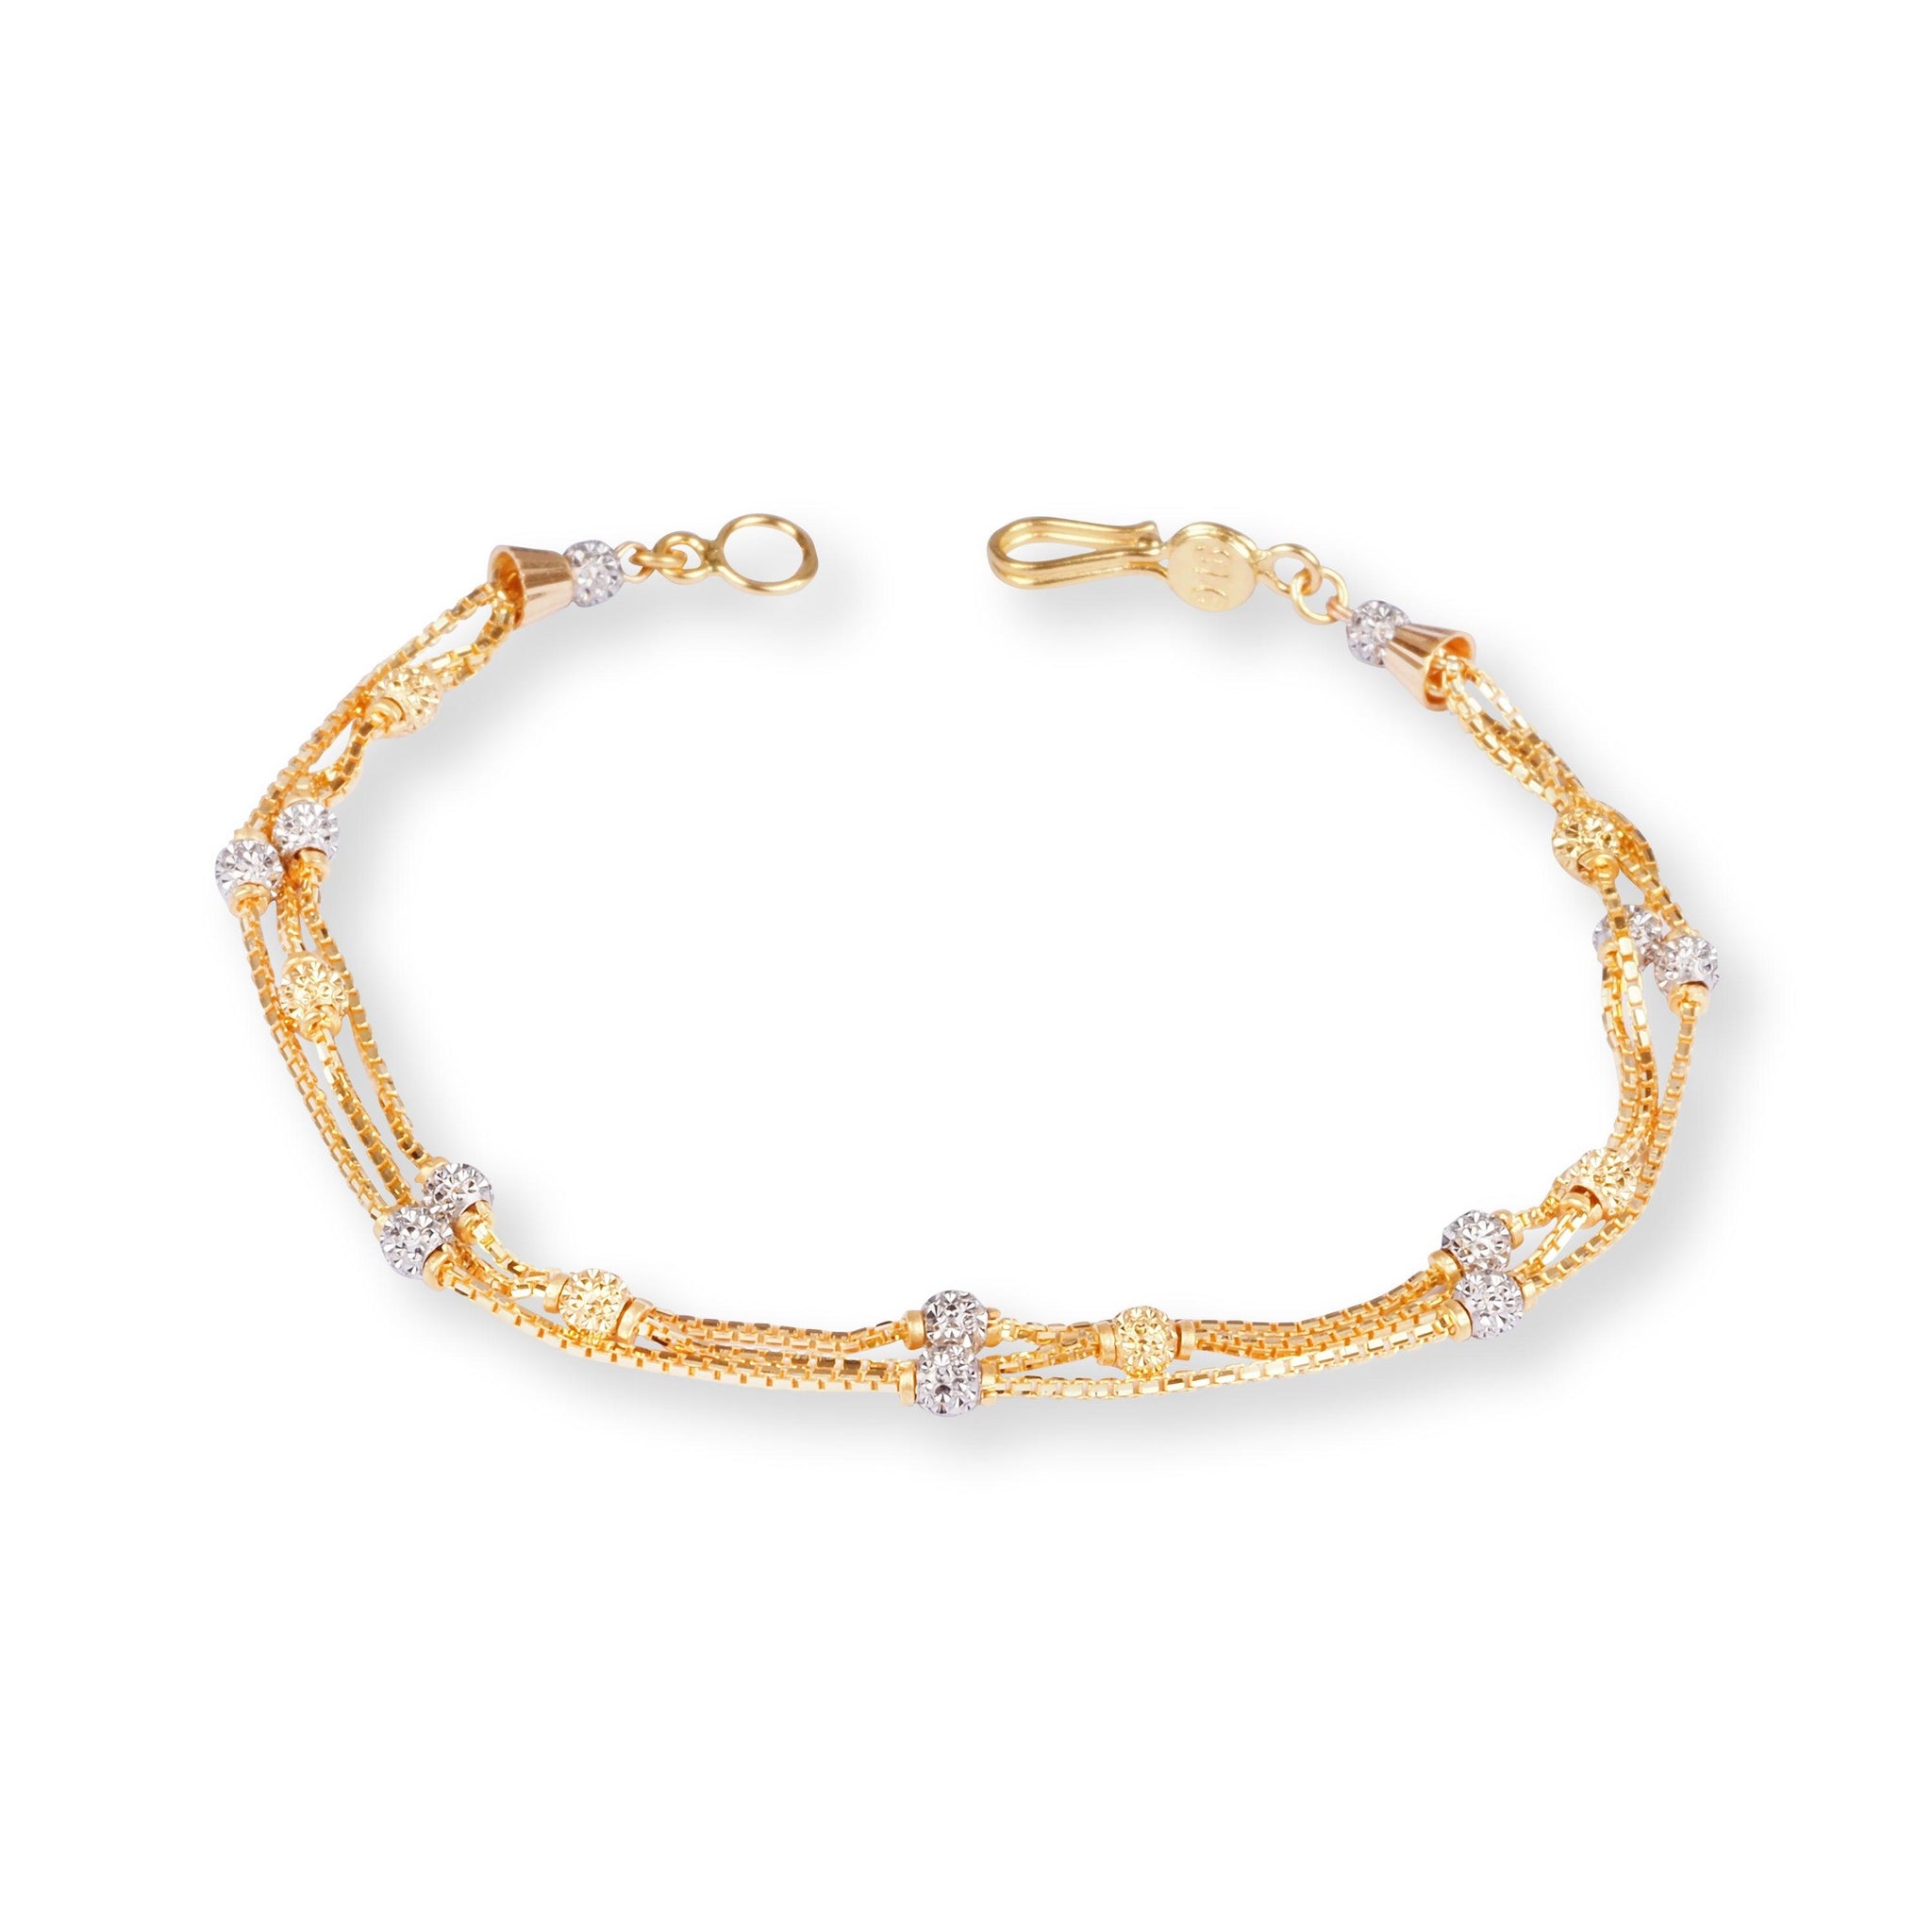 22ct Gold Three Row Bracelet with Plain and Rhodium Diamond Cut Beads and Hook Clasp LBR-8501